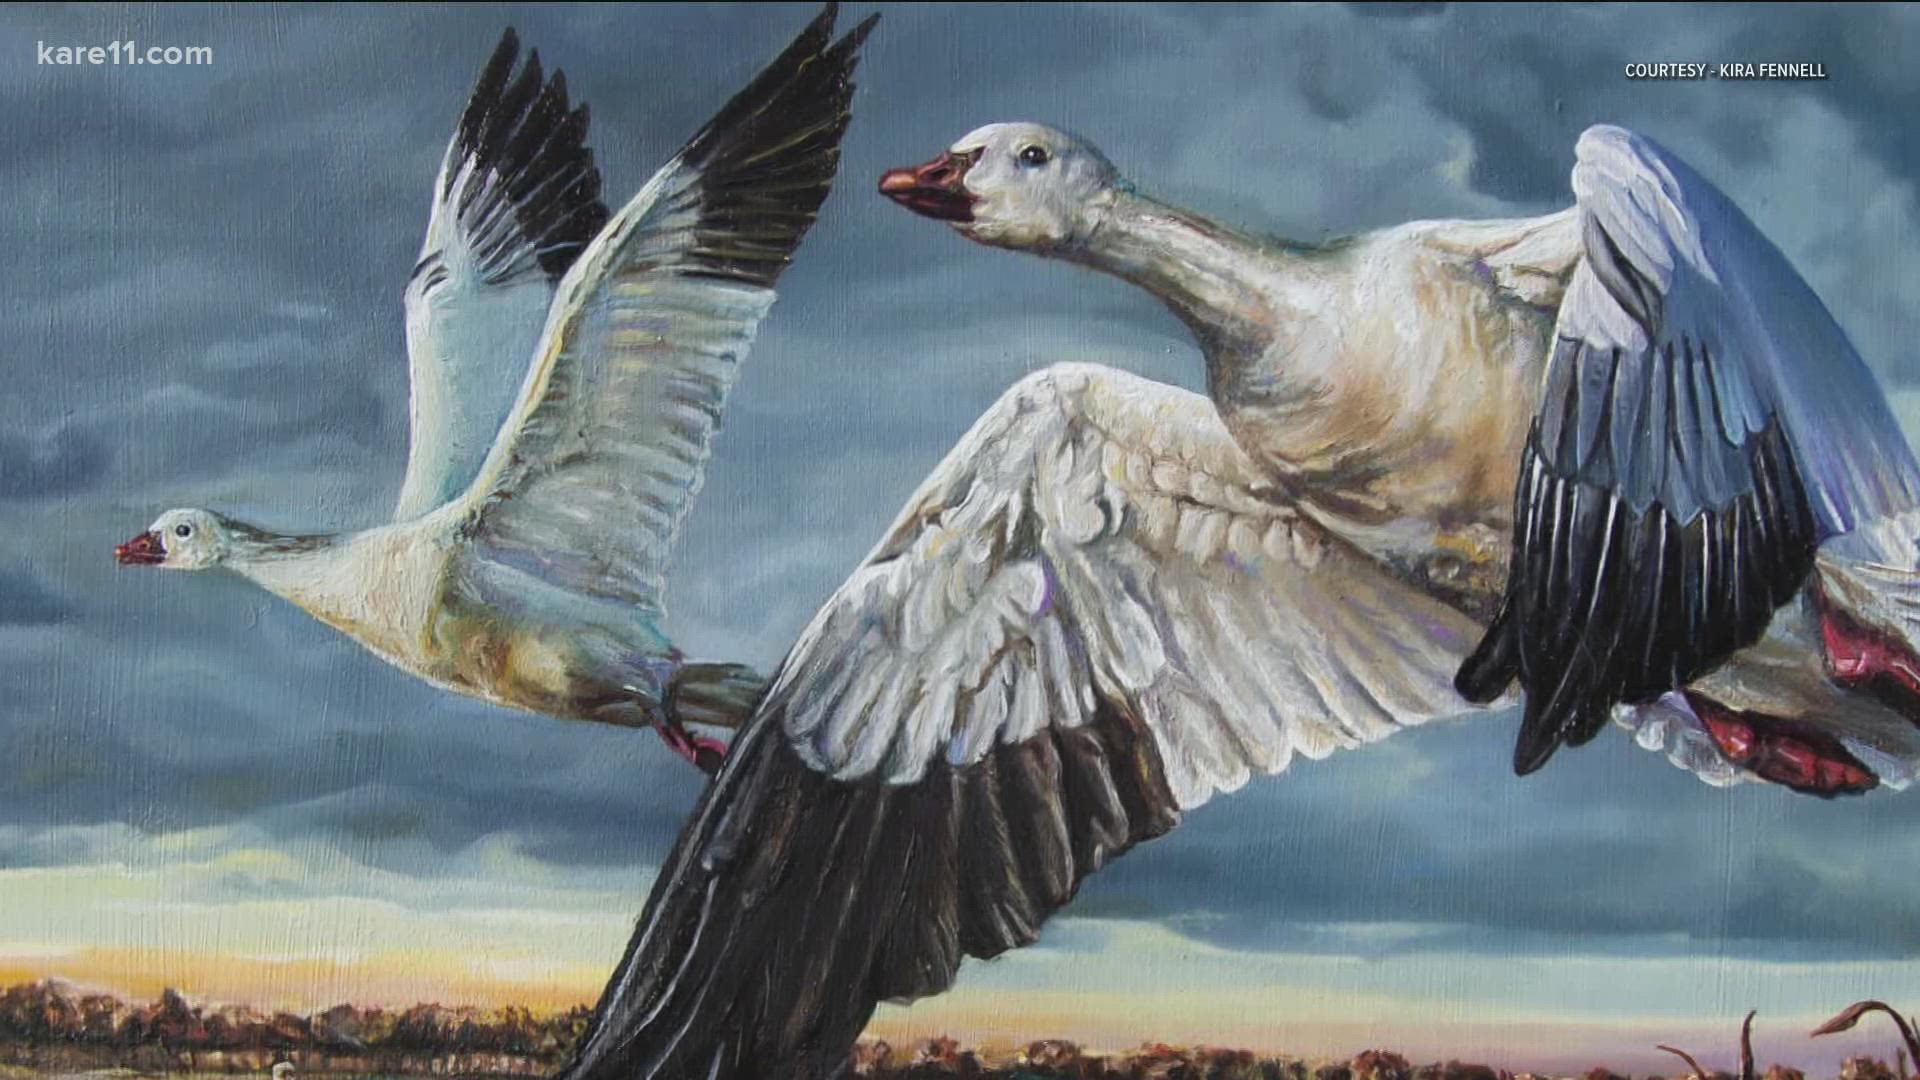 Wildlife officials say the annual federal duck stamp design contest is one of the most successful conservation tools in its tool belt.